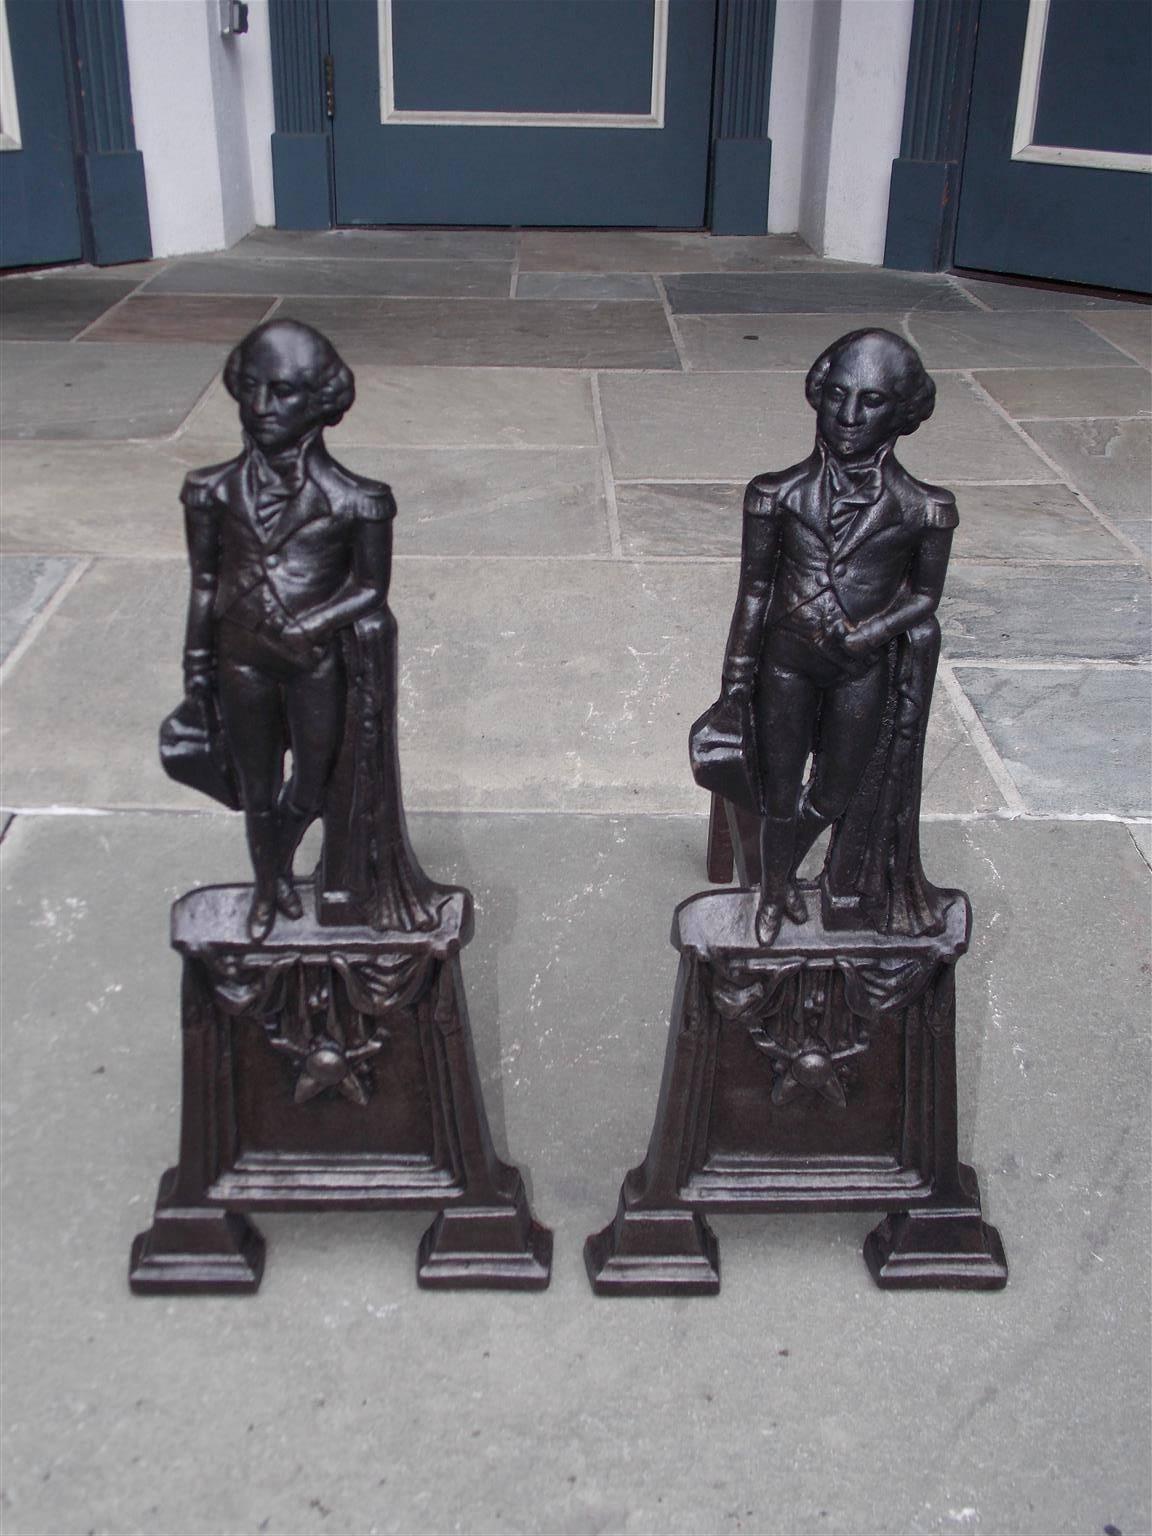 Pair of American cast iron George Washington andirons with GW campaigning in Military attire erected on decorative star plinths with step back feet, Mid-19th century. Depth can be adjusted if desired by local blacksmith at no additional cost.